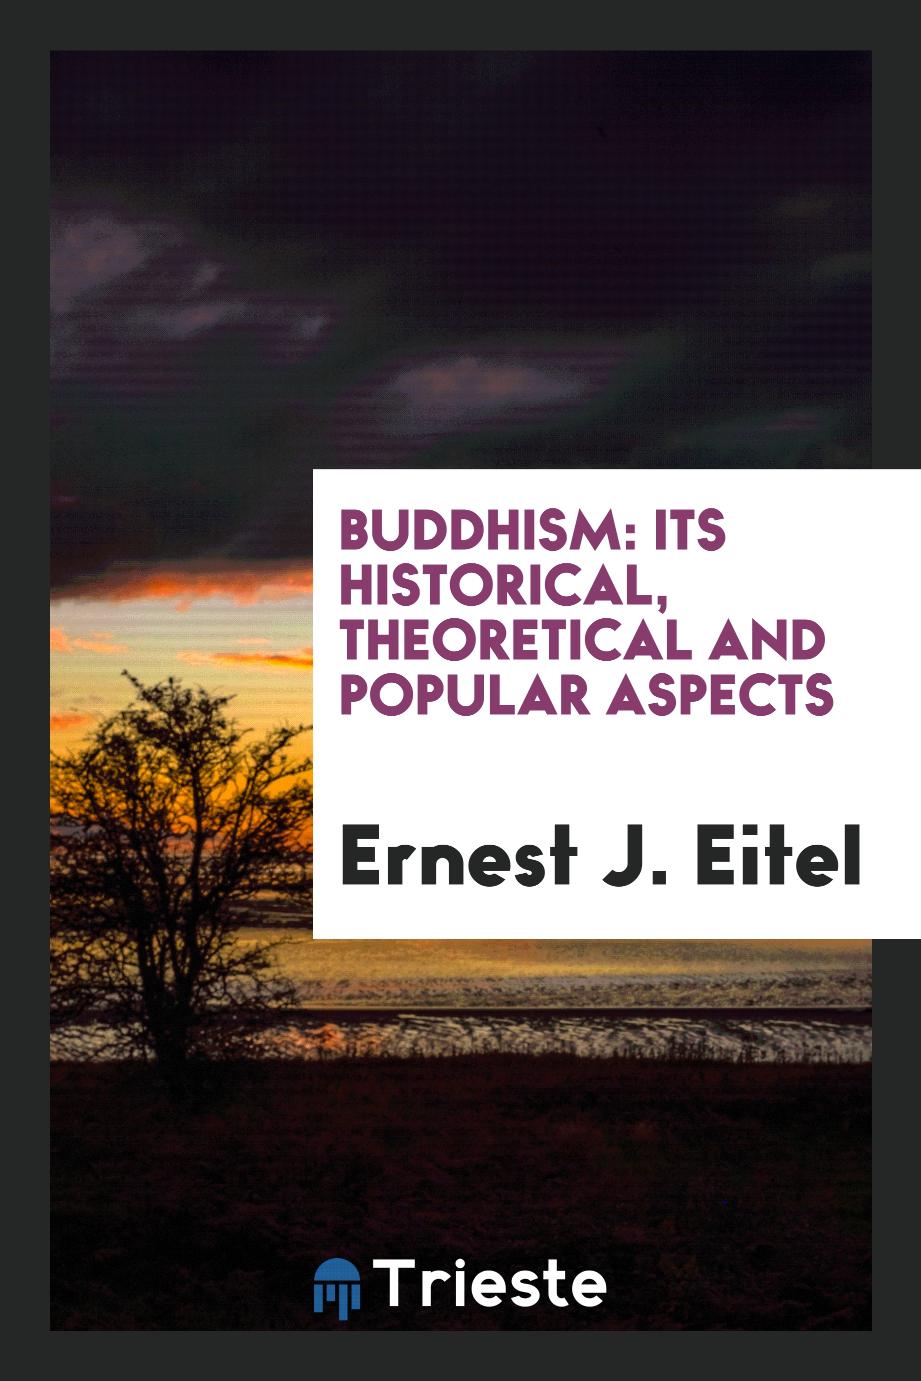 Buddhism: Its Historical, Theoretical and Popular Aspects